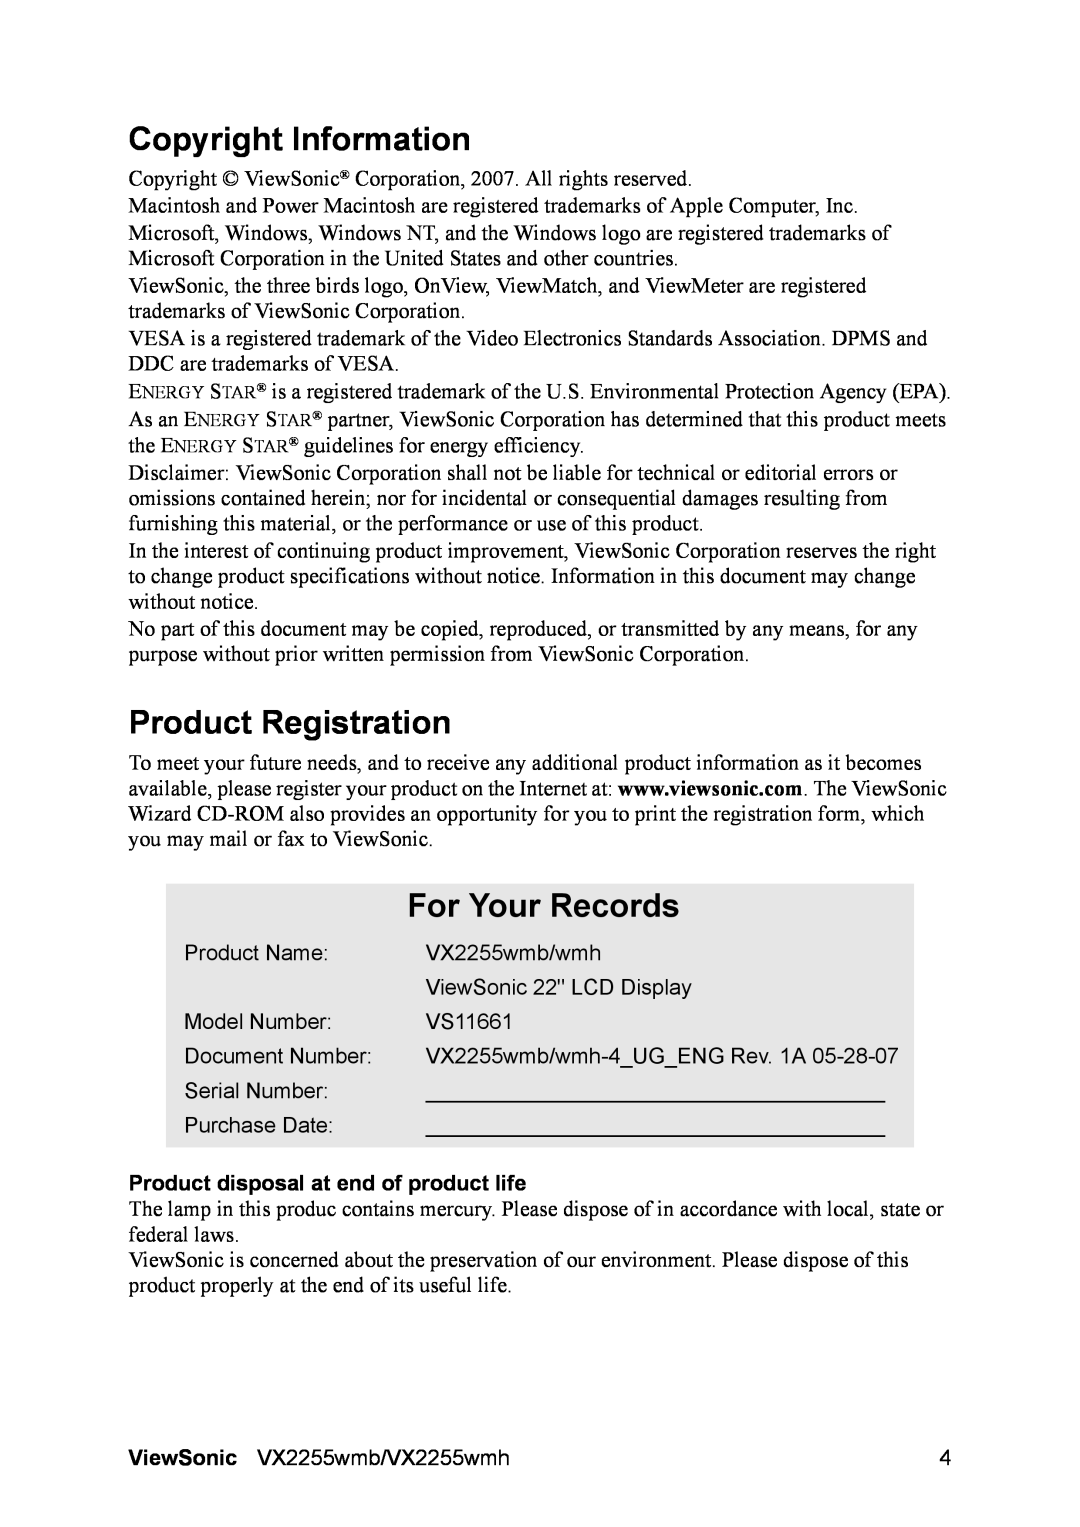 ViewSonic VX2255WMH Copyright Information, Product Registration, For Your Records, Product disposal at end of product life 